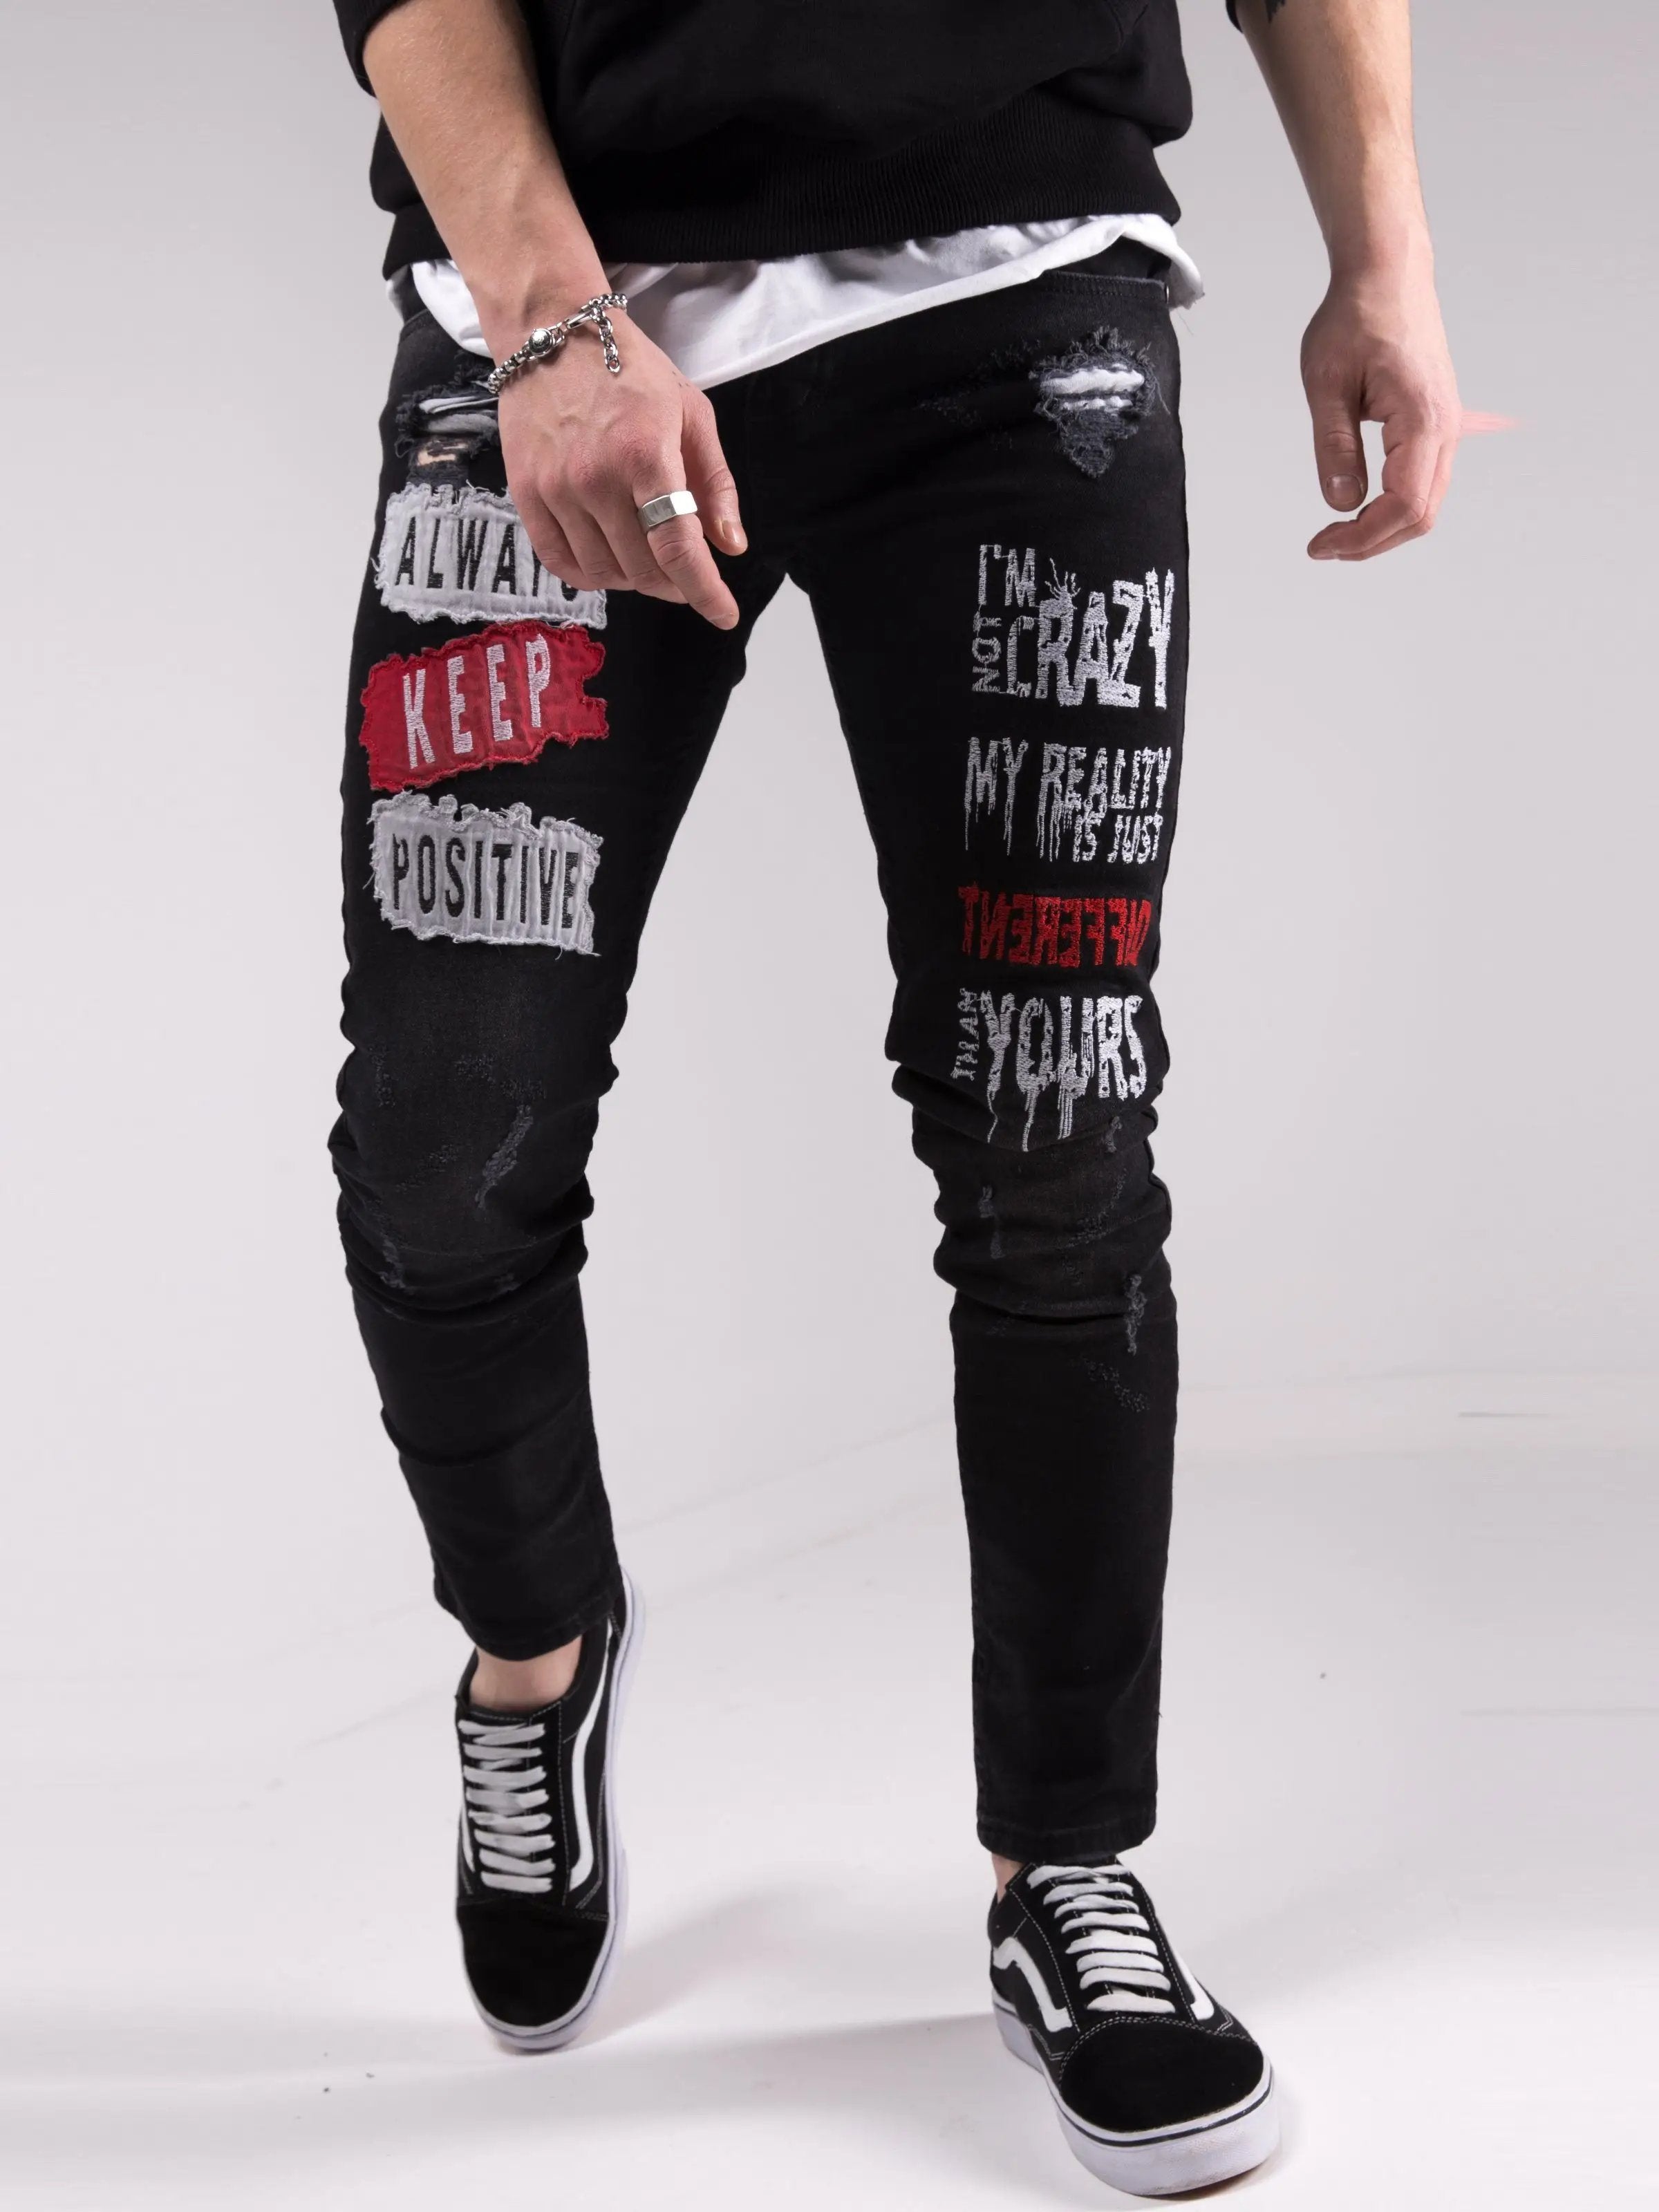 A man wearing a pair of I'M NOT CRAZY jeans with graffiti on them.